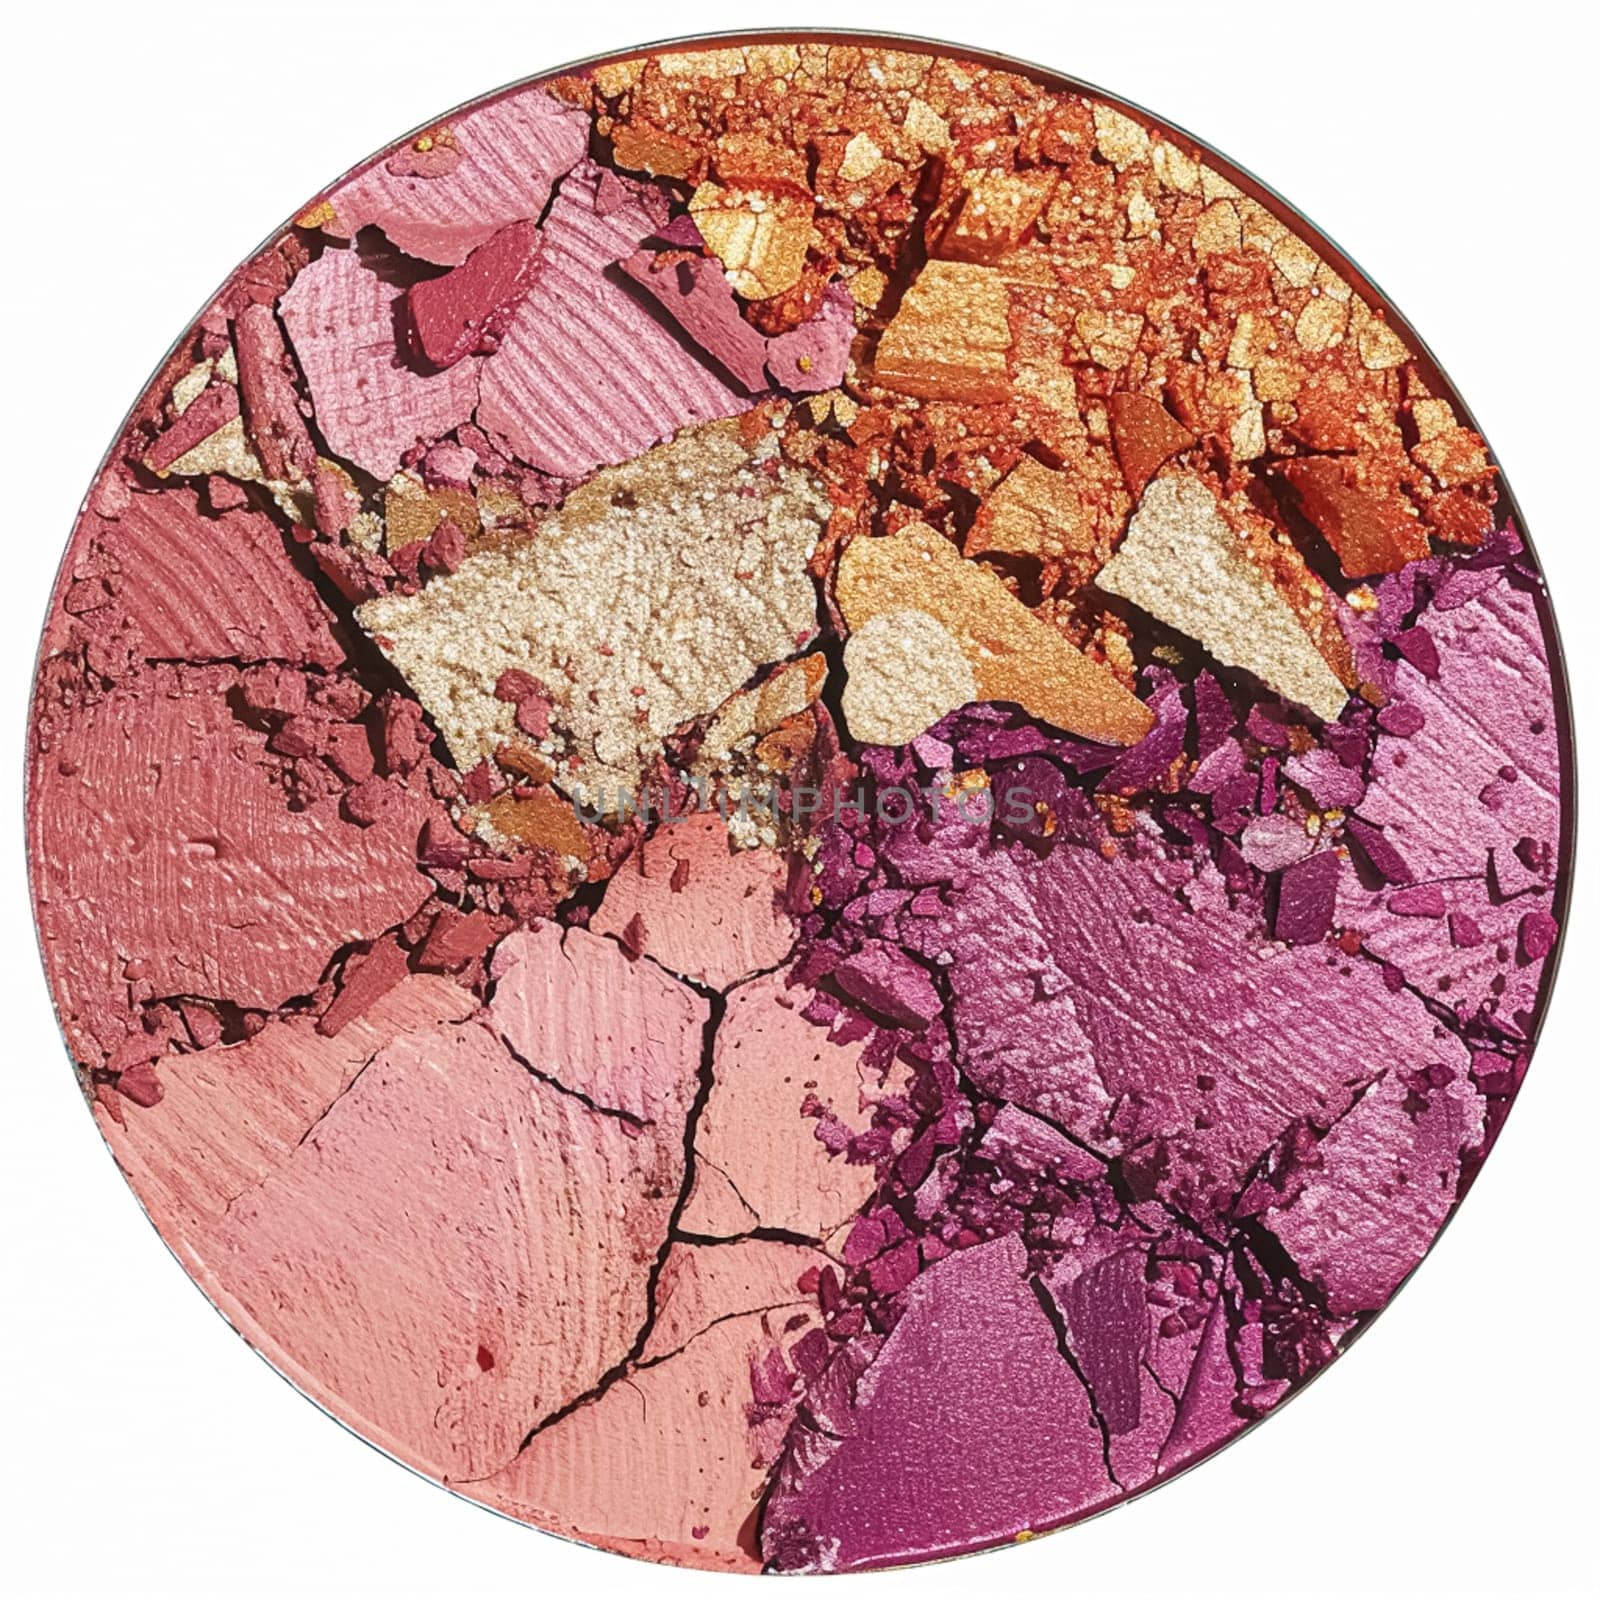 Beauty product and cosmetics texture as circle shape design, makeup blush eyeshadow powder as abstract luxury cosmetic background by Anneleven